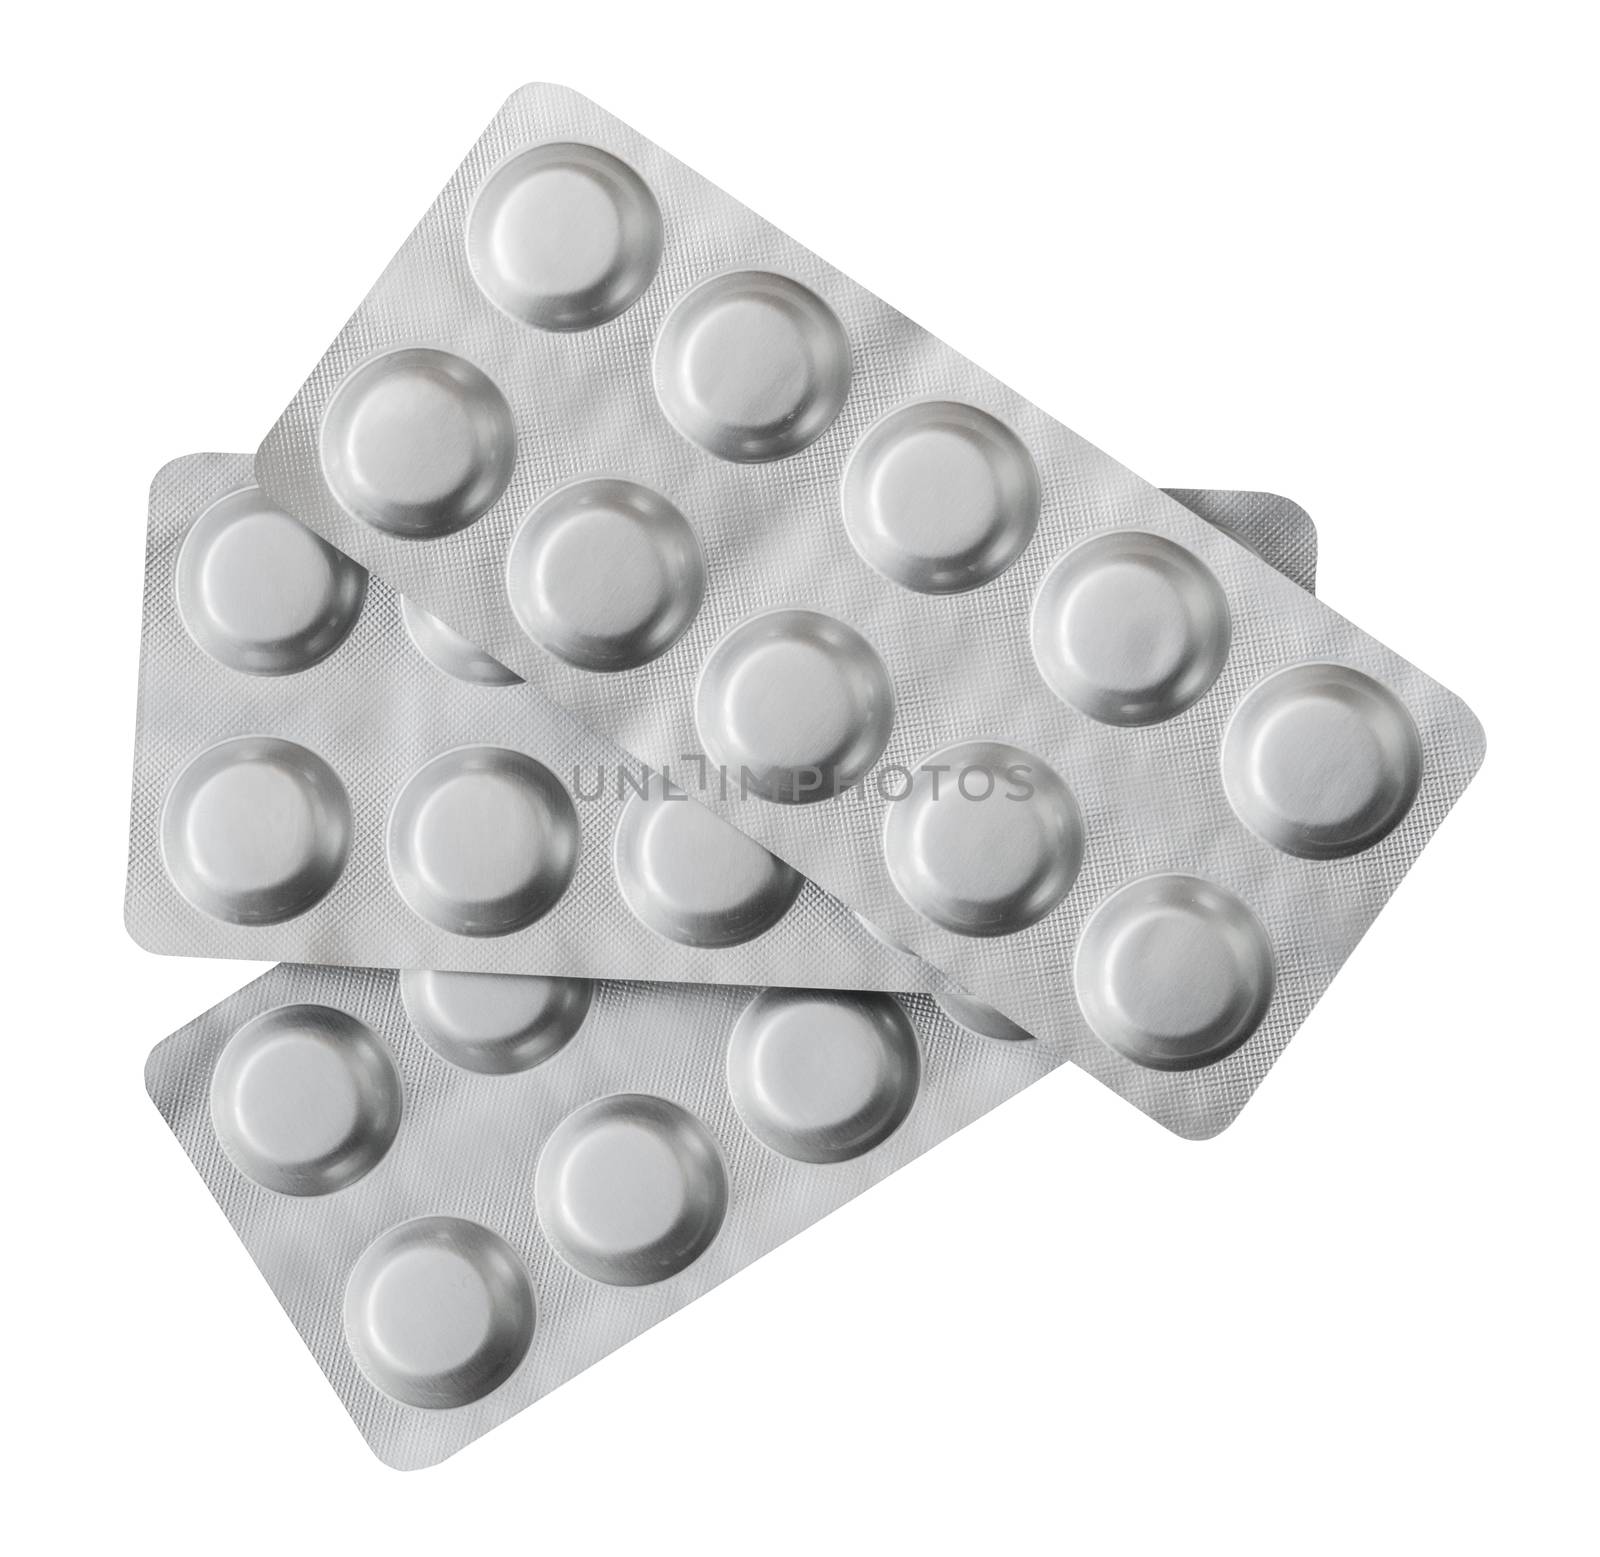 Pile Of Medical Pill Blister Packs Isolated On A White Background